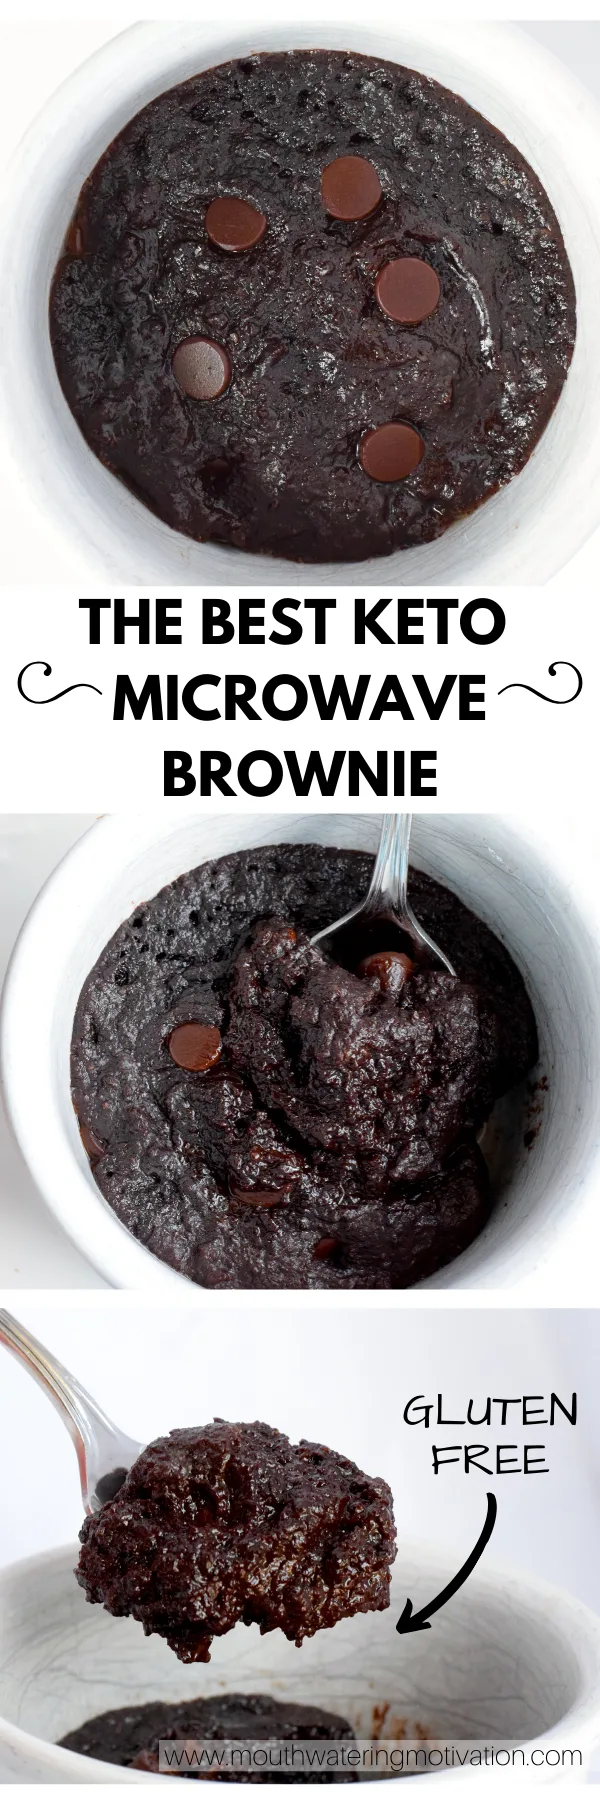 The Best Keto 1 Minute Microwave Brownie | Mouthwatering Motivation